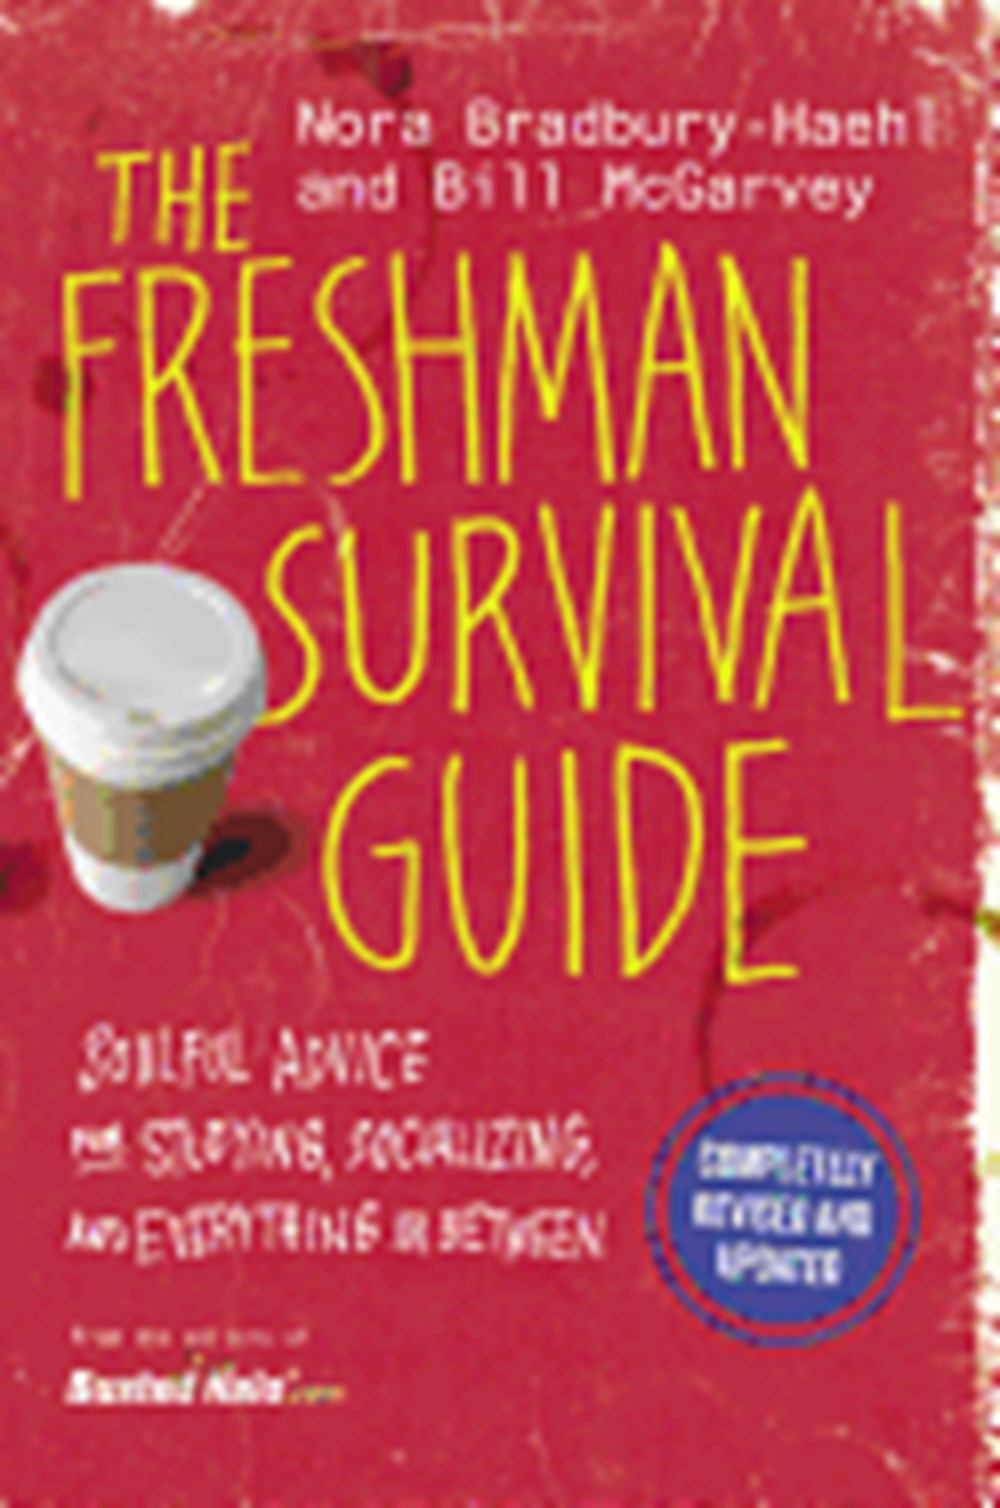 Freshman Survival Guide: Soulful Advice for Studying, Socializing, and Everything in Between (Revise